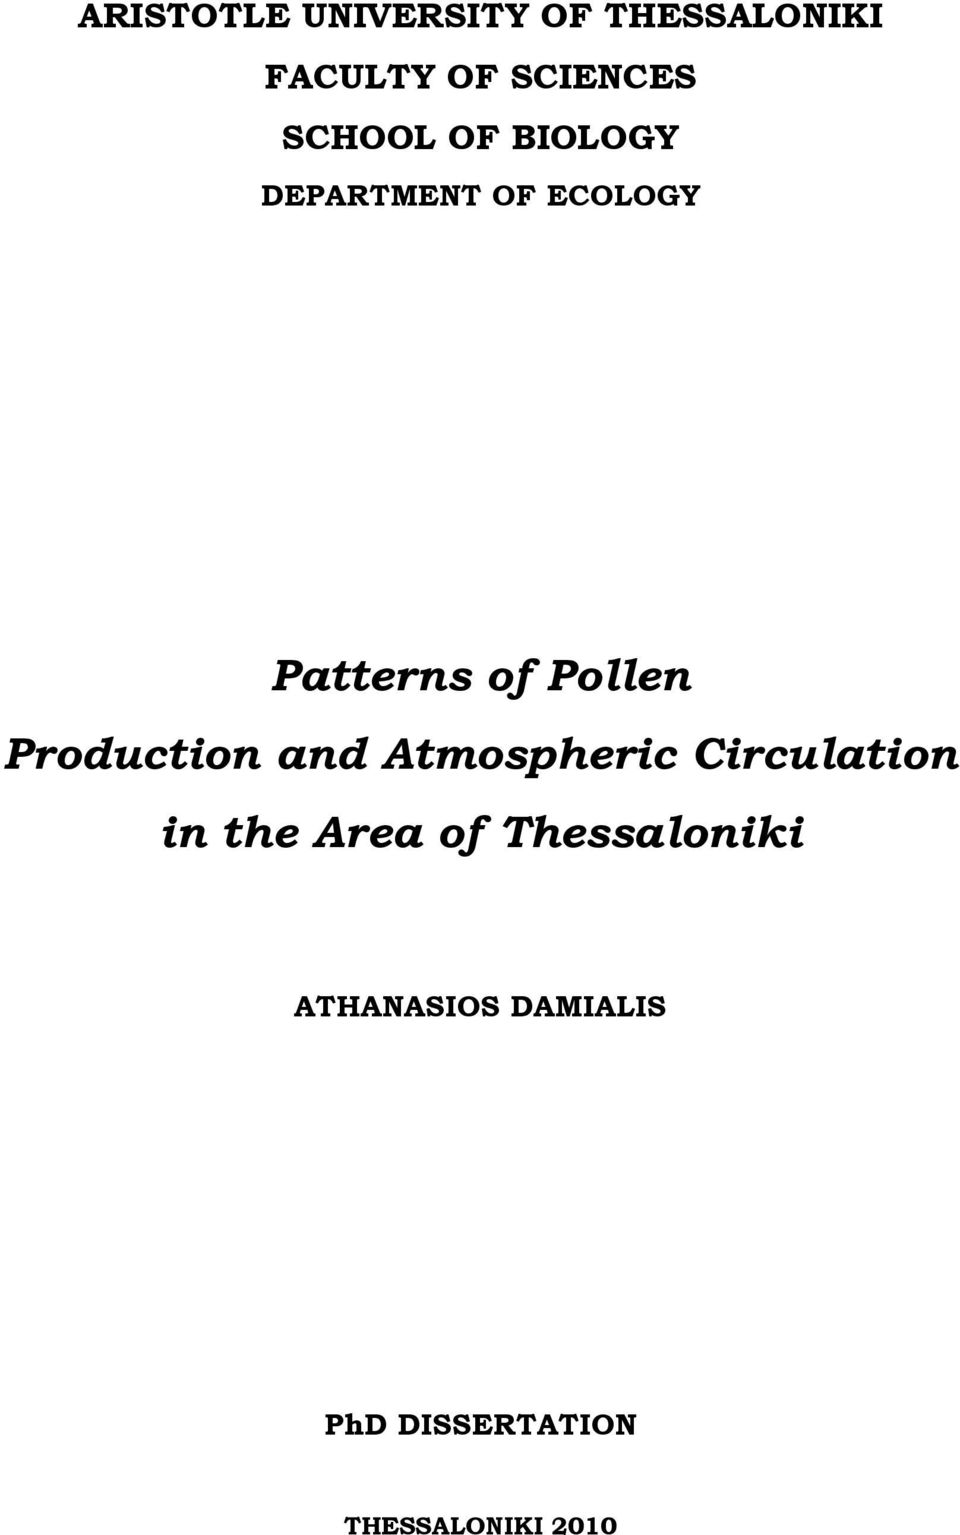 Production and Atmospheric Circulation in the Area of